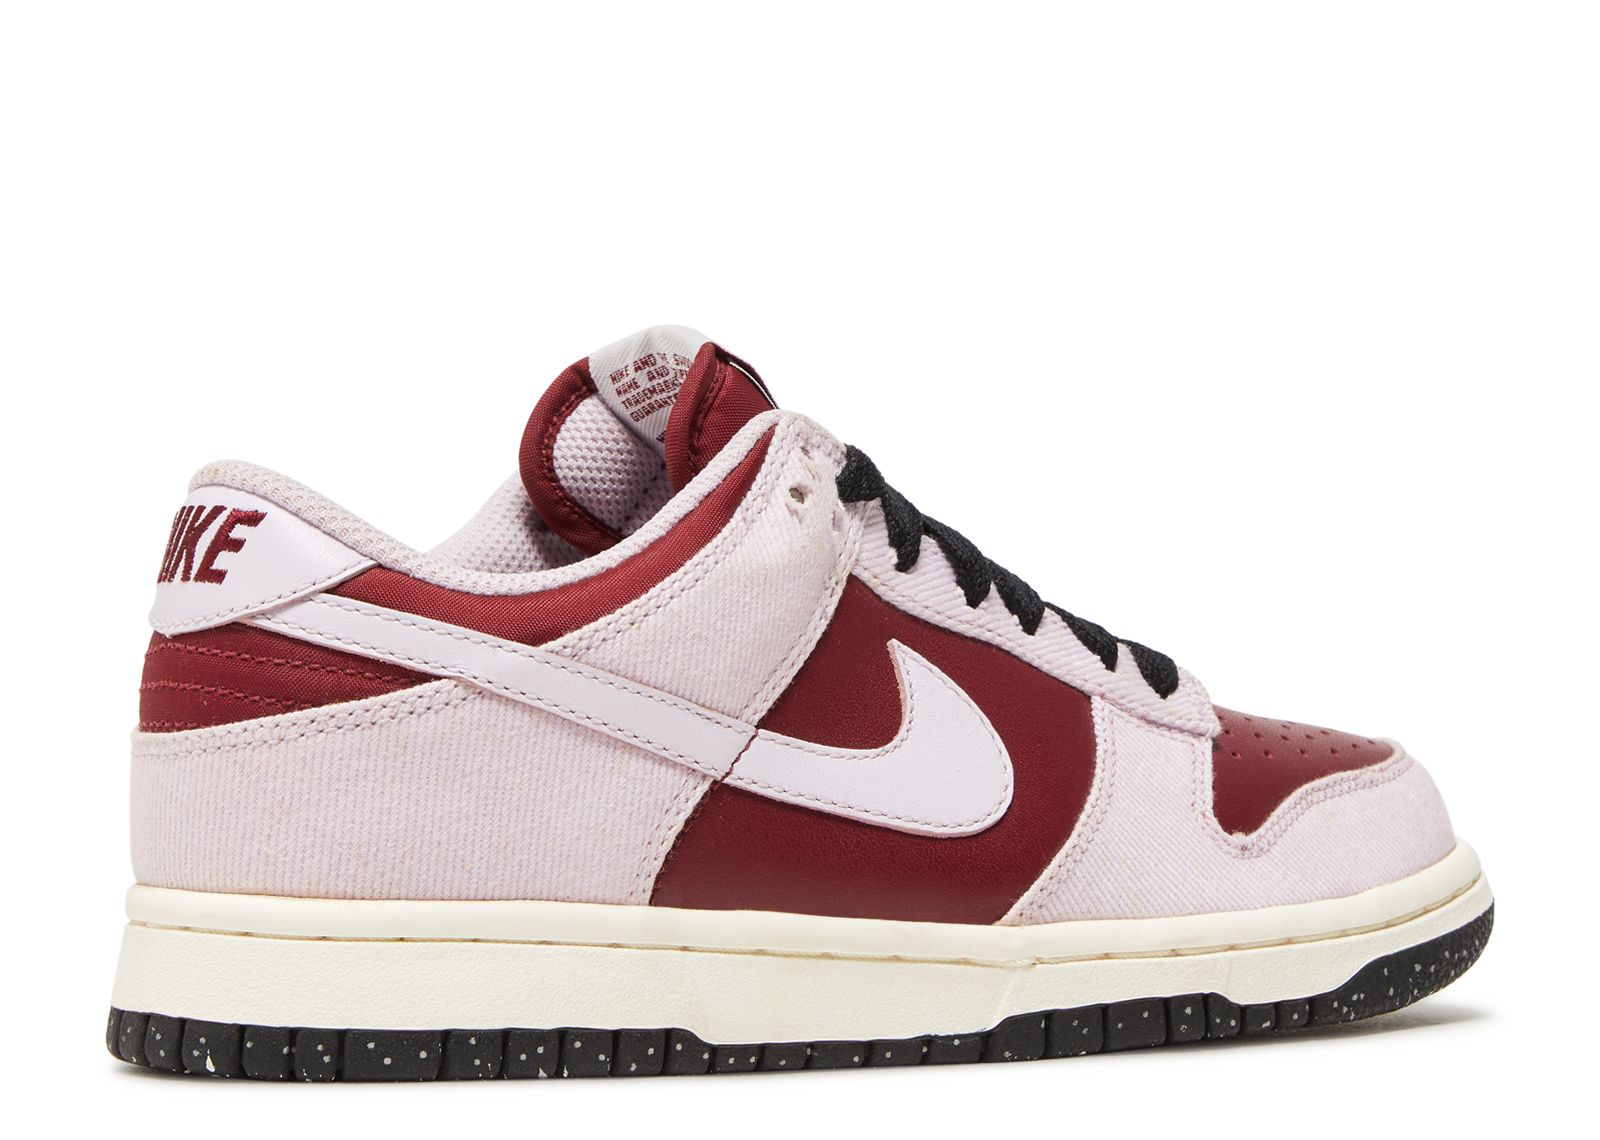 W'S Dunk Low Cl - Nike - 317815 651 - team red/doll-black-sail 